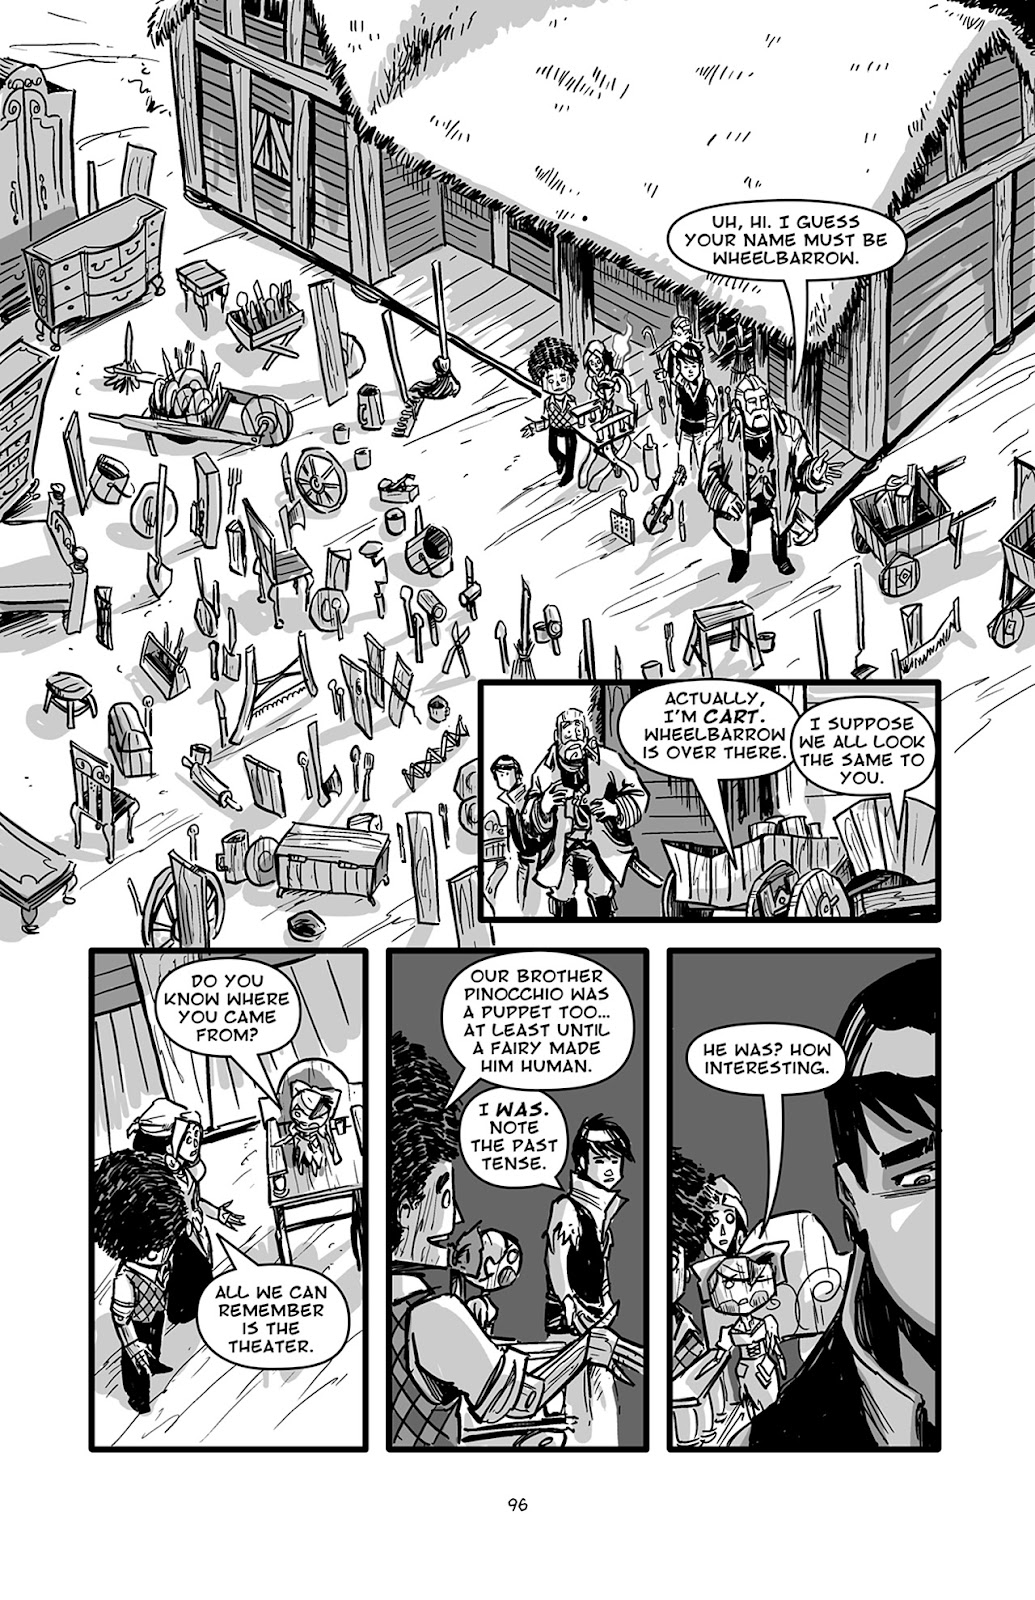 Pinocchio: Vampire Slayer - Of Wood and Blood issue 4 - Page 23